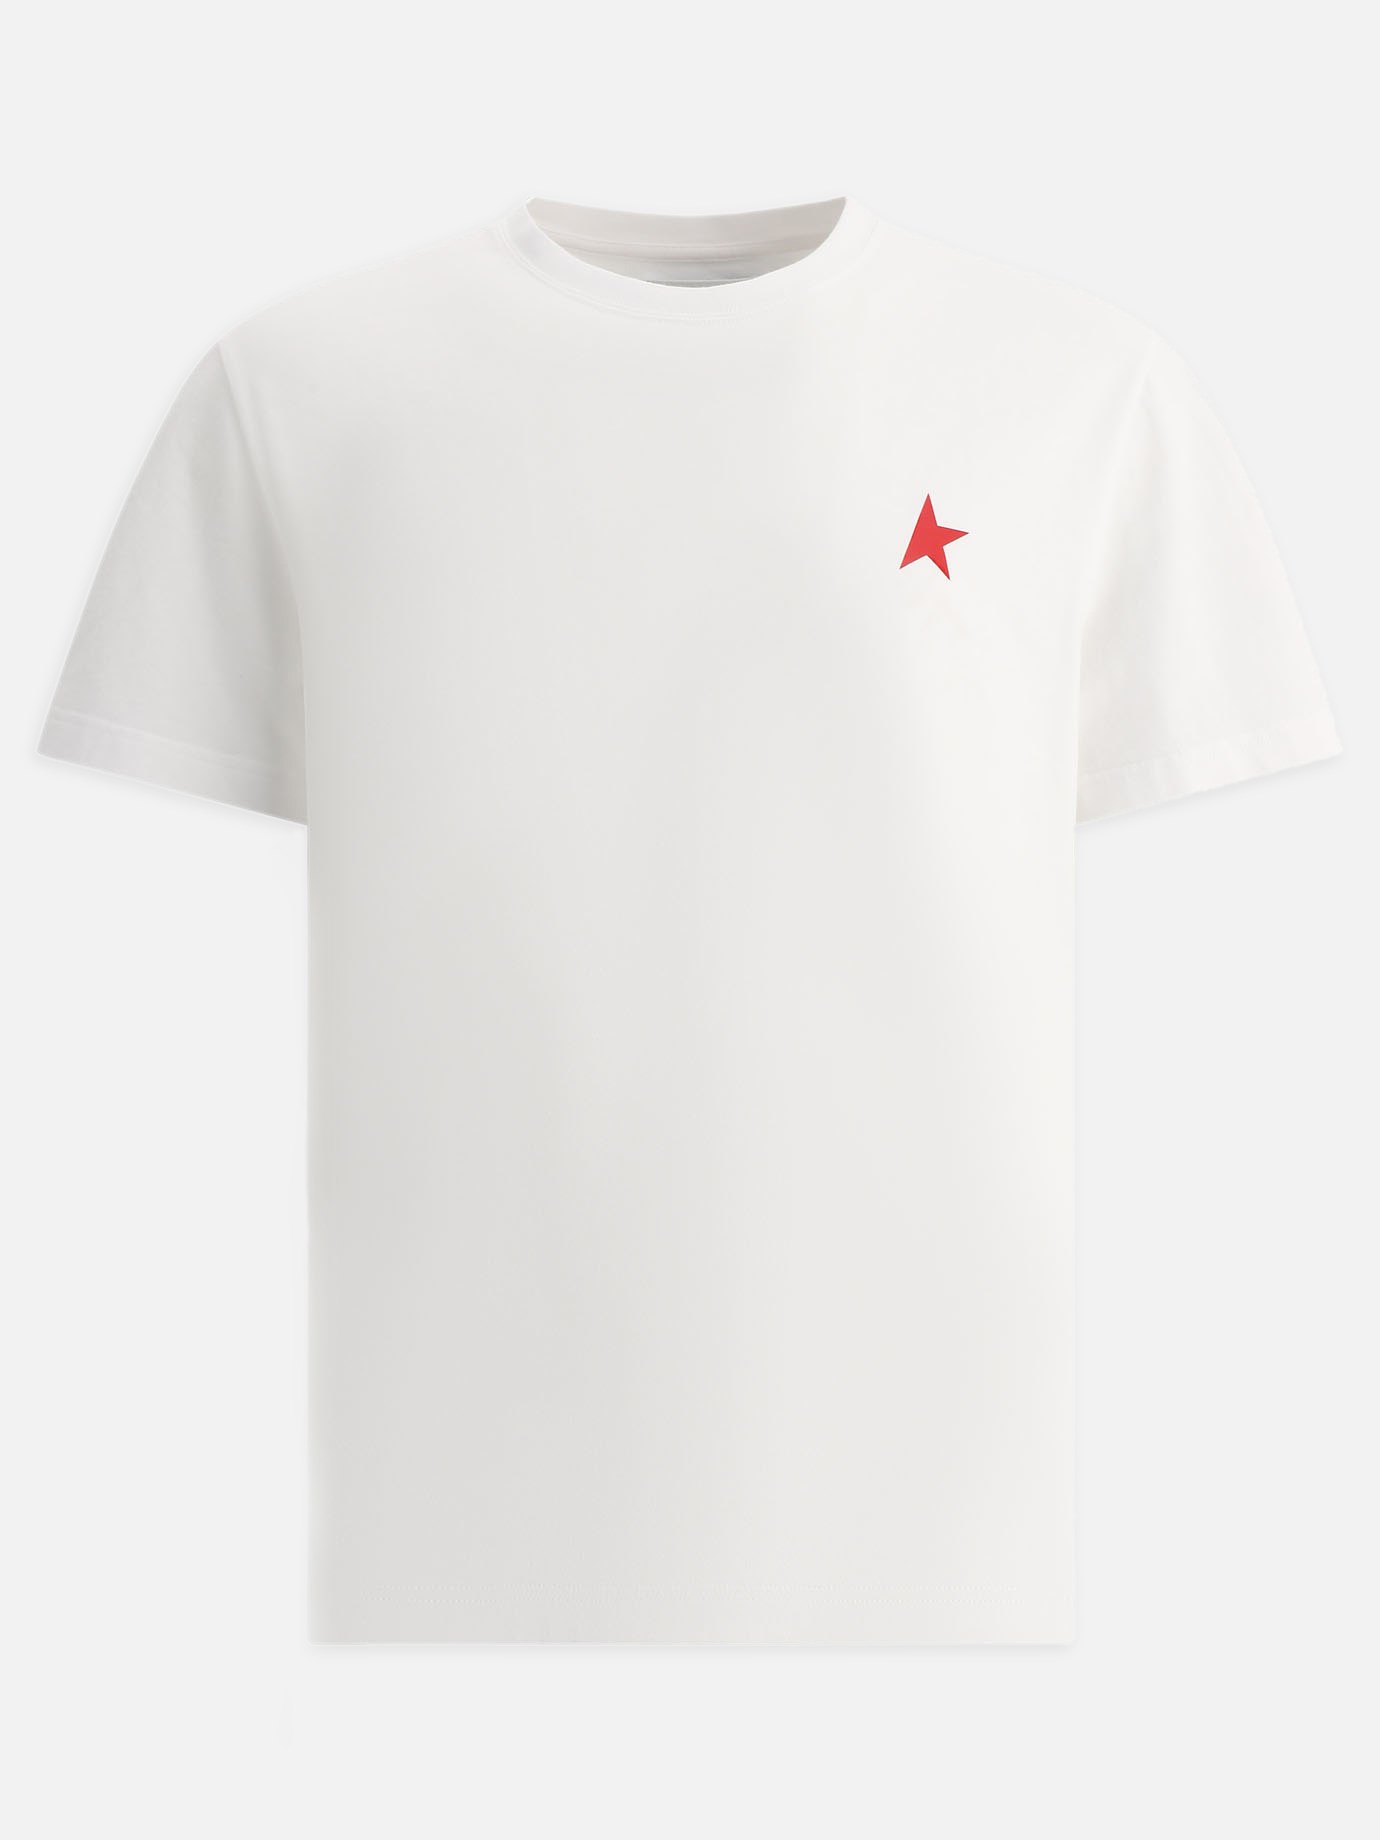 T-shirt  Red Star  by Golden Goose